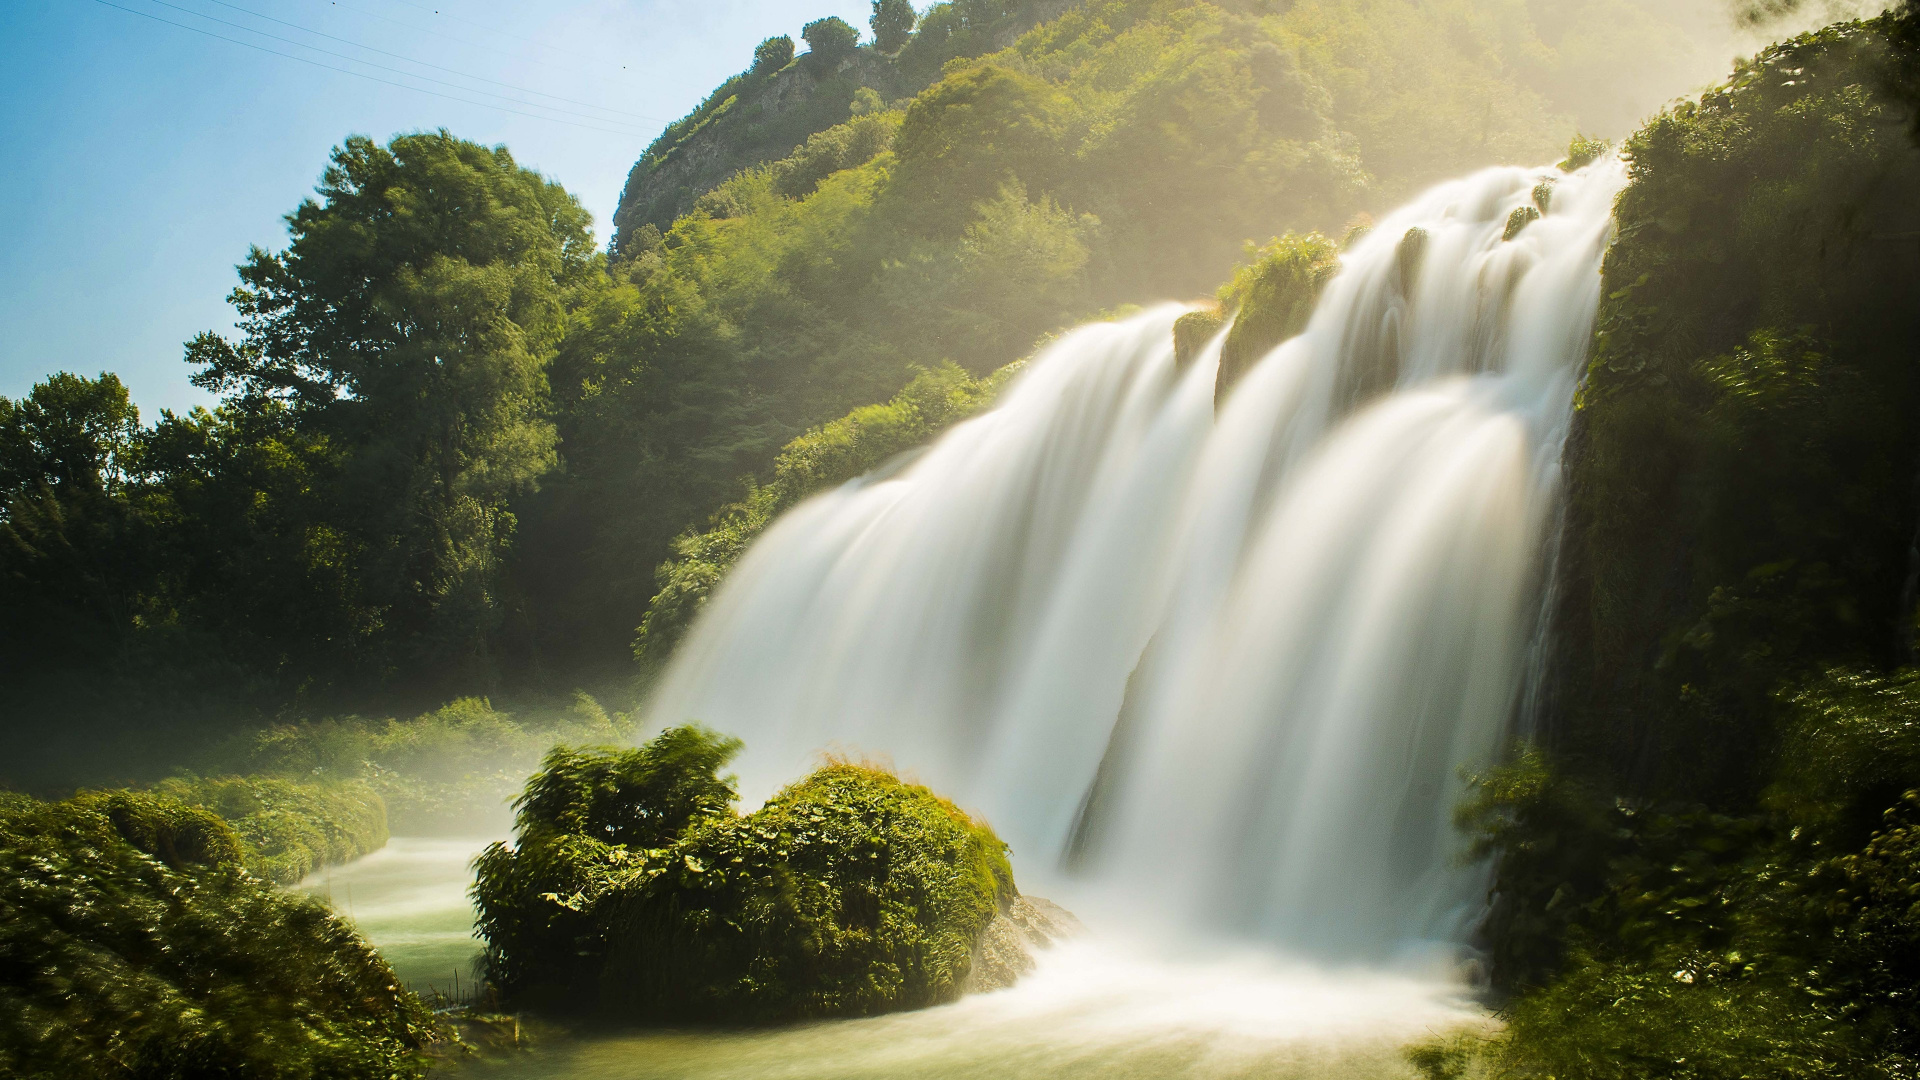 Waterfalls in The Middle of Green Trees. Wallpaper in 1920x1080 Resolution